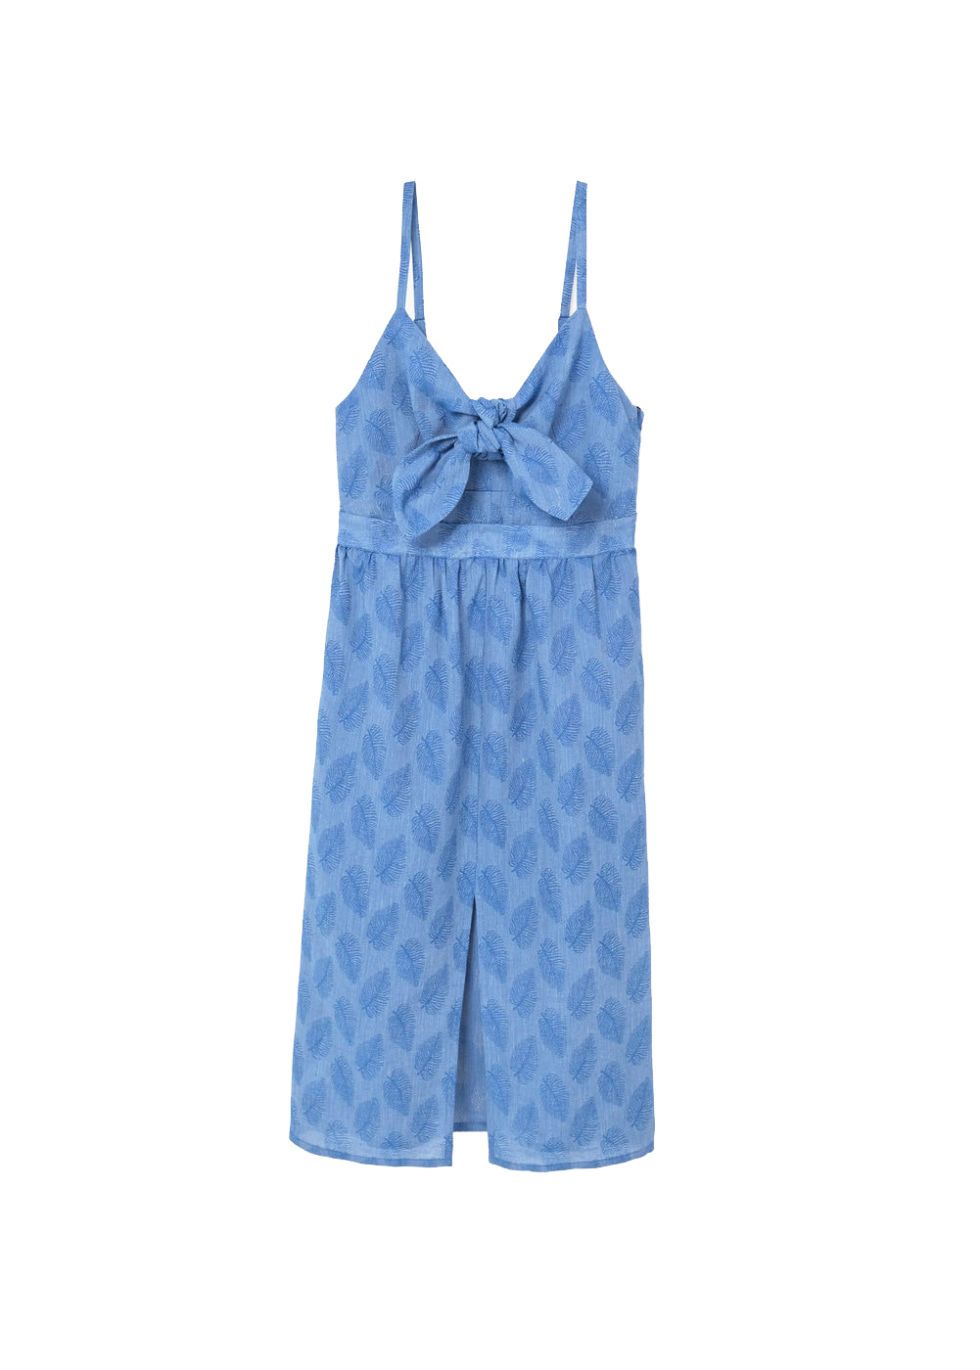 Clothing, Blue, One-piece garment, Turquoise, Aqua, Shorts, Overall, camisoles, Denim, Pattern, 